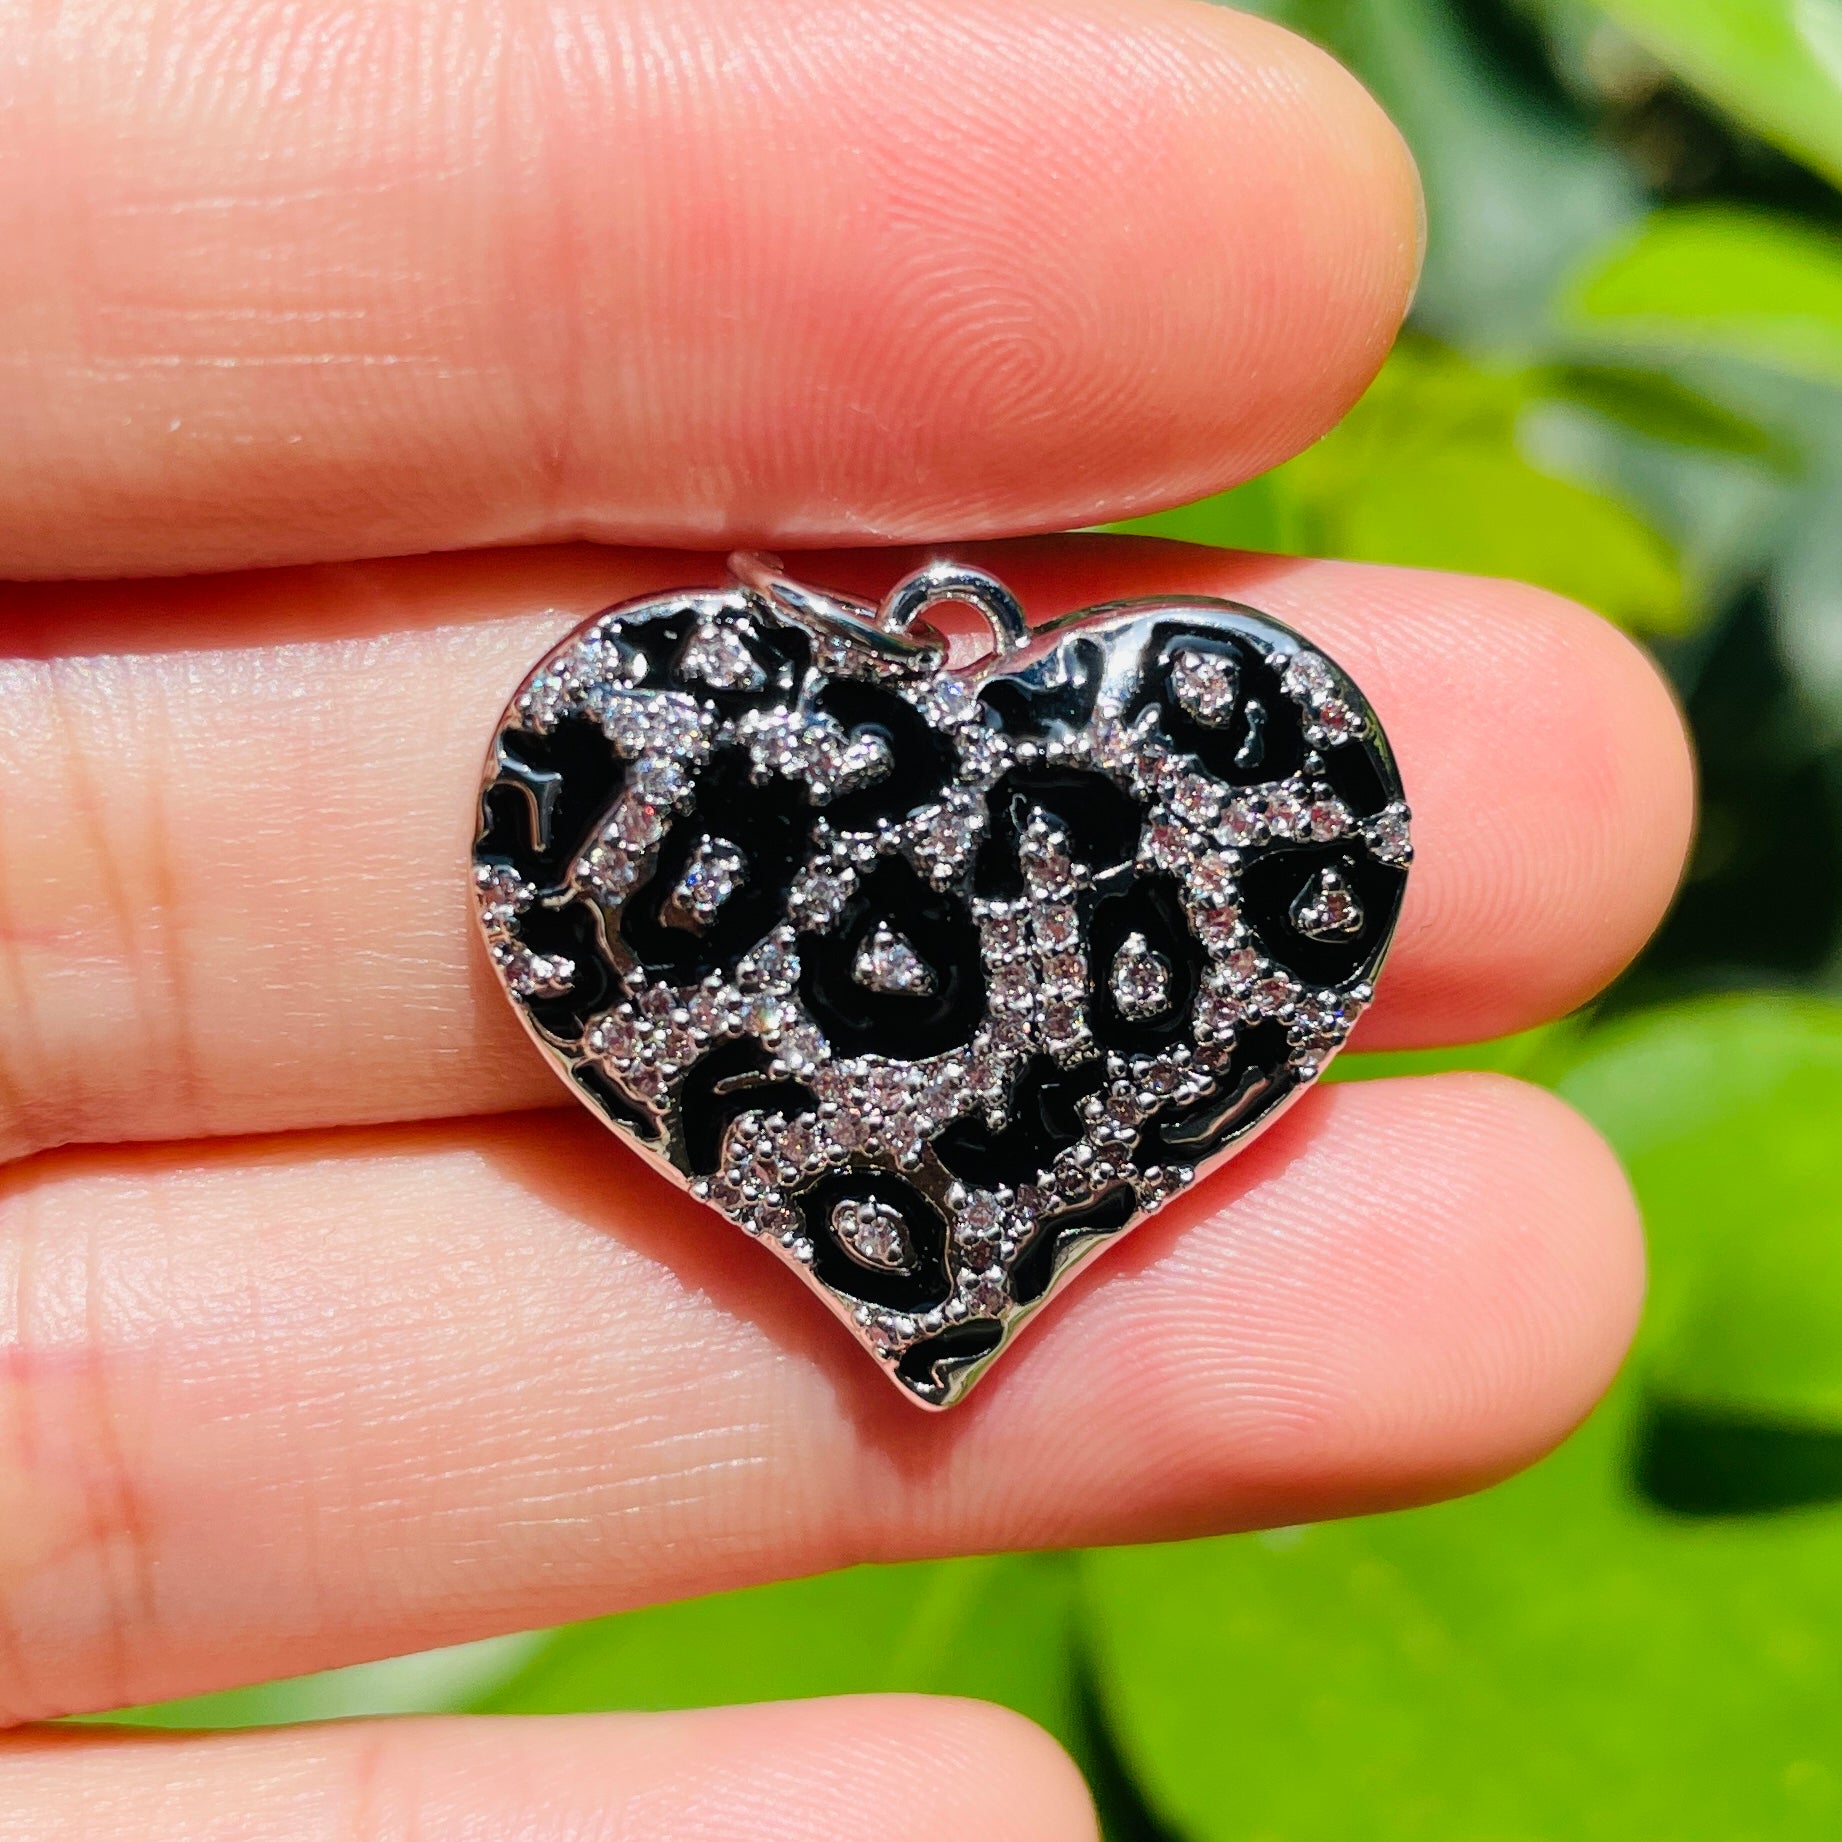 10pcs/lot 24.5*22mm CZ Paved Black Leopard Print Heart Charm Pendants CZ Paved Charms Hearts Leopard Printed New Charms Arrivals Charms Beads Beyond